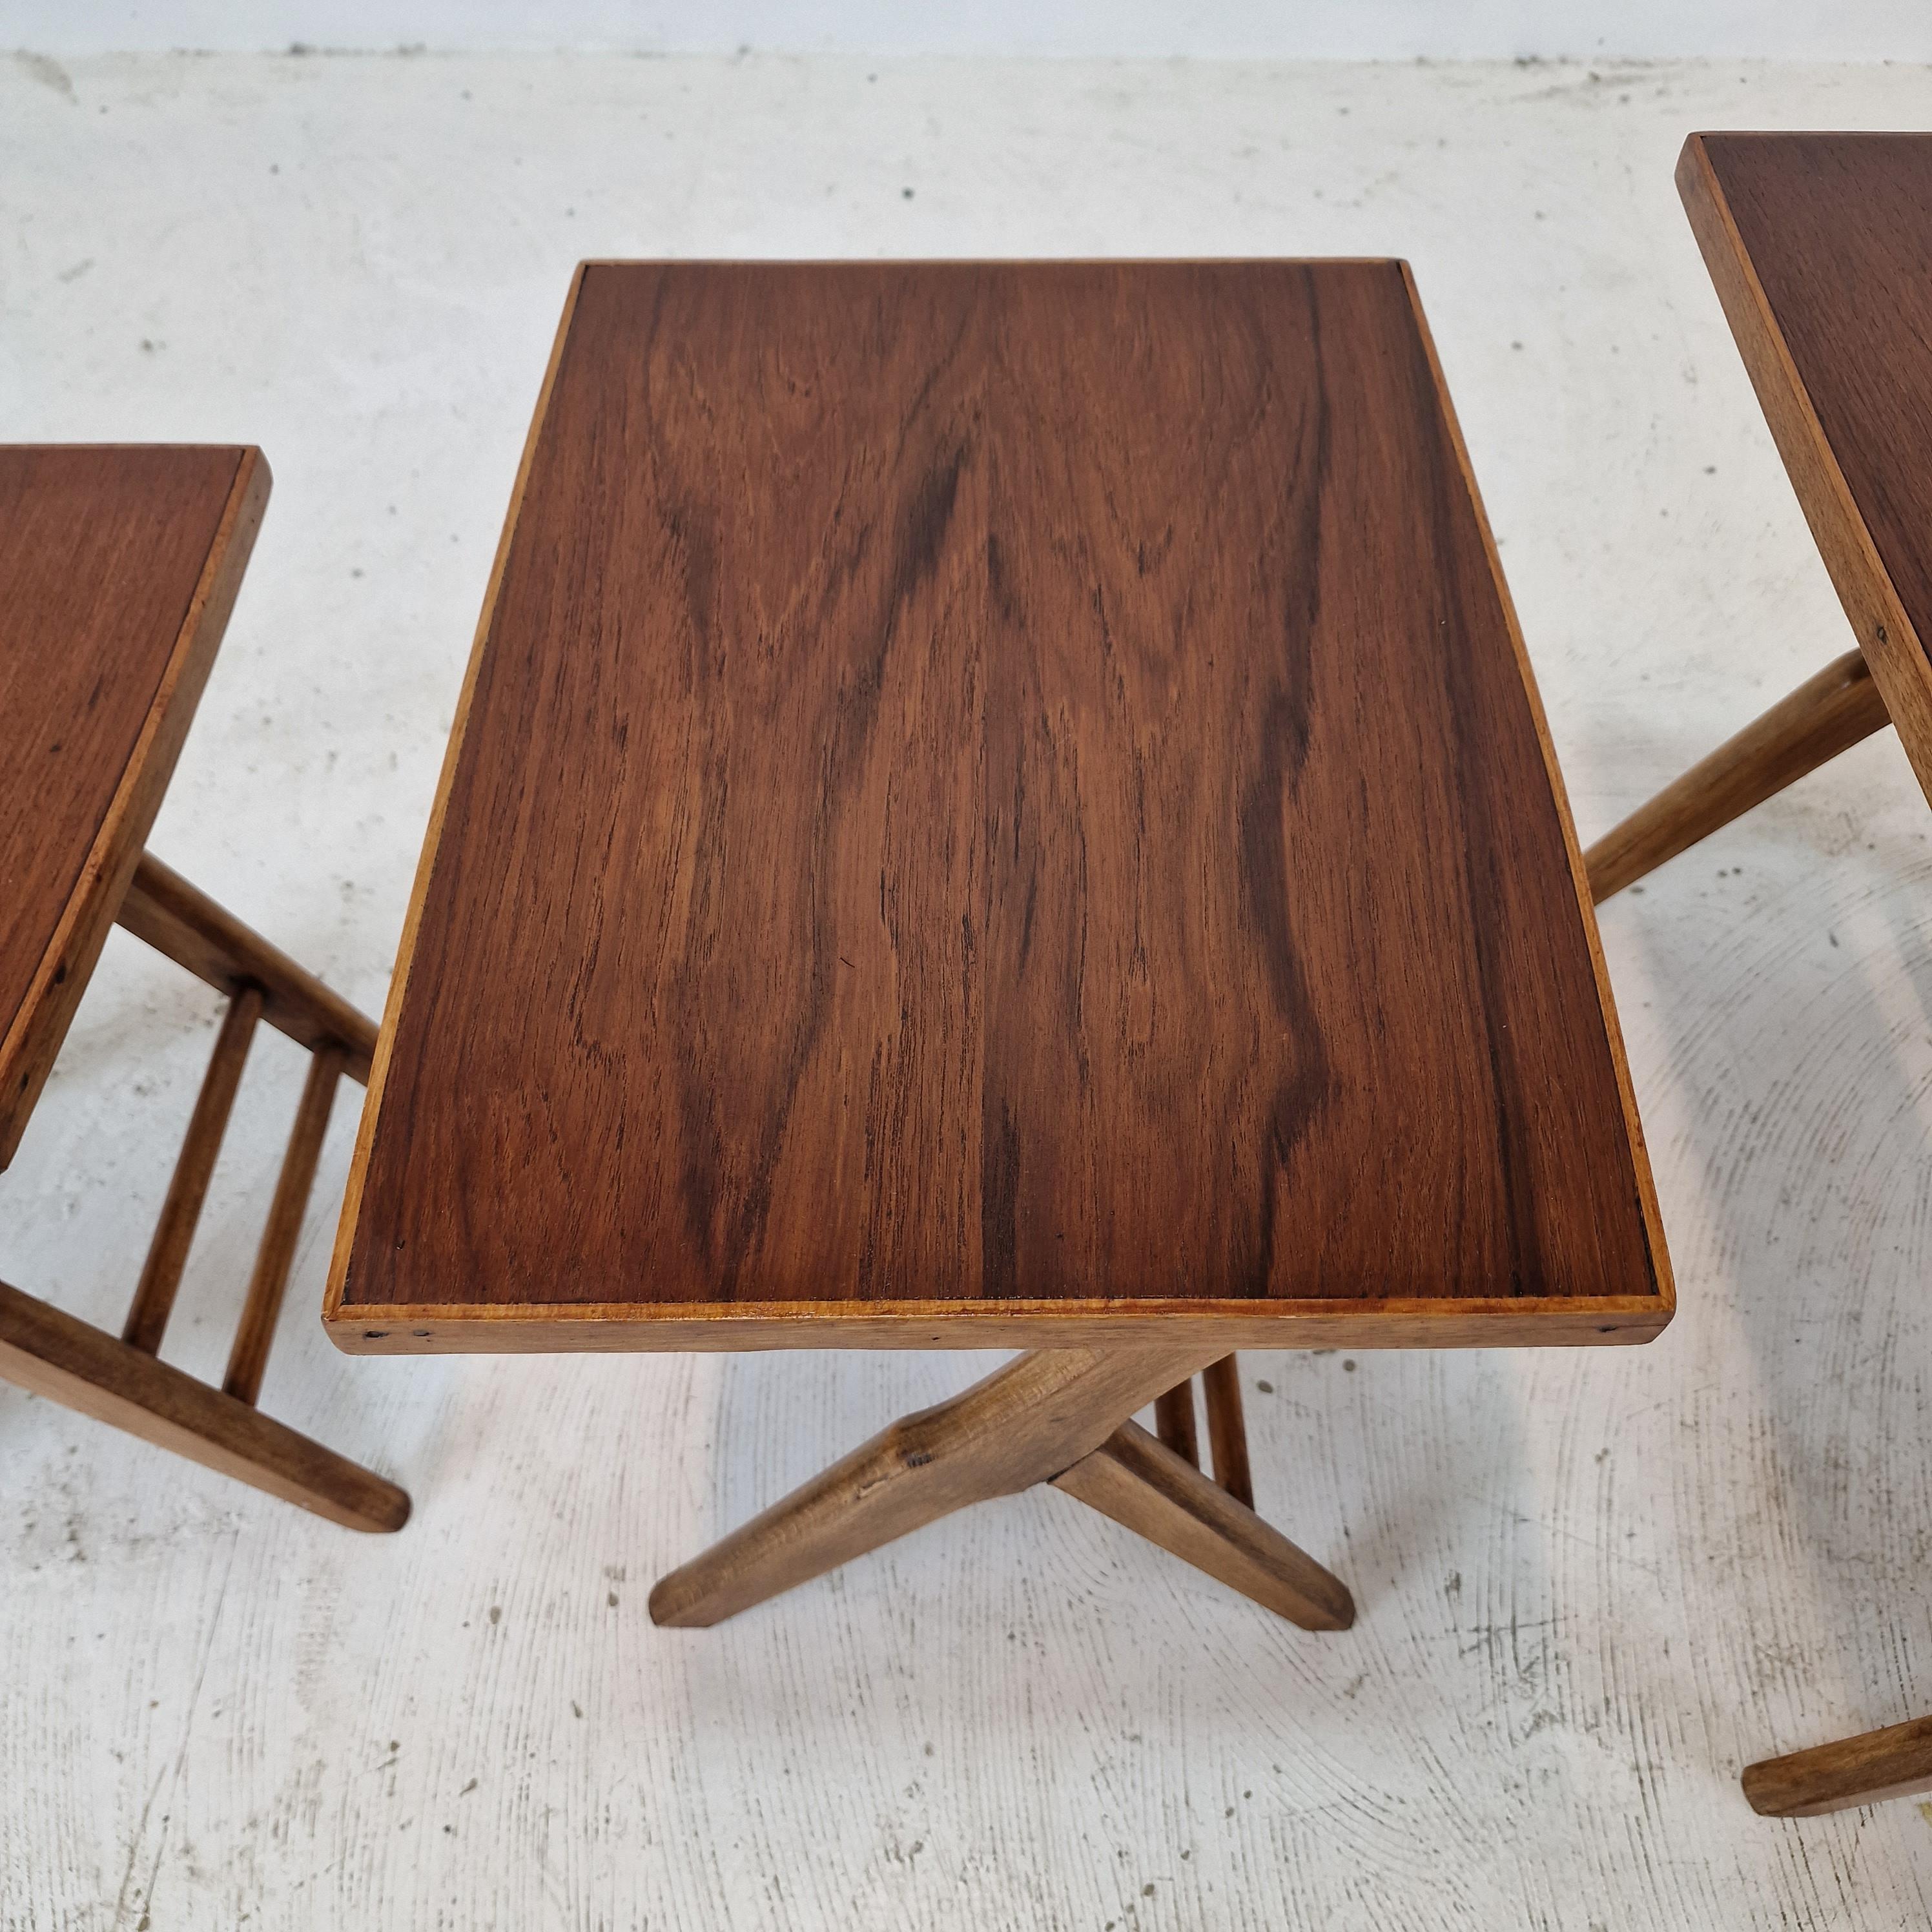 Set of 3 Wooden Nesting Tables, Holland 1960s For Sale 5